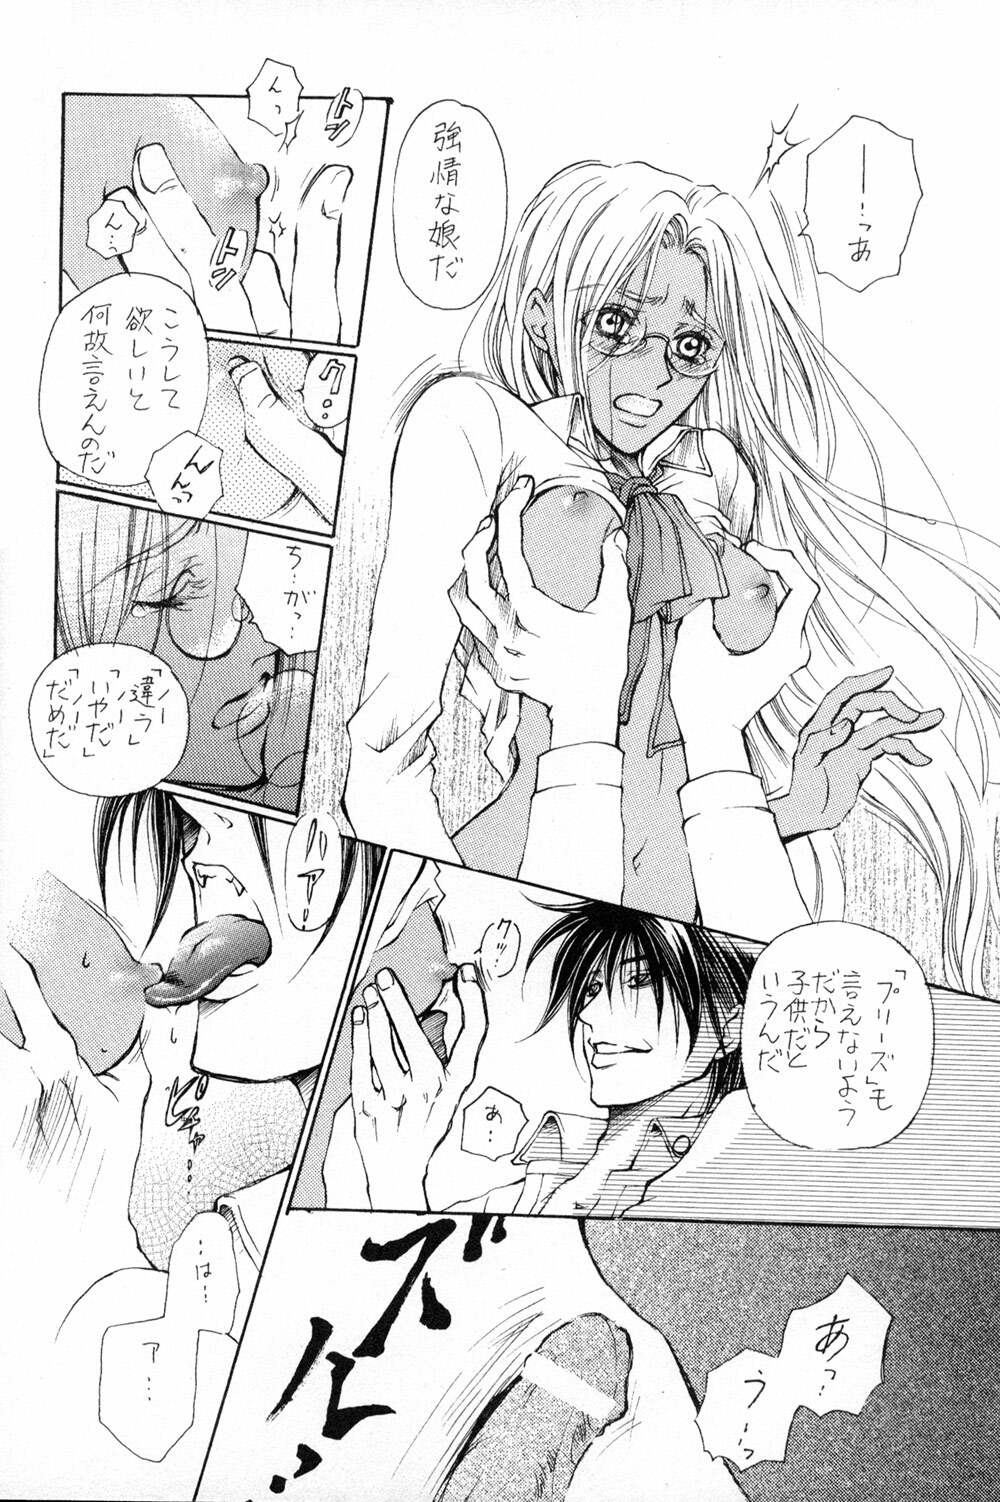 The Long Tunnel of Wanting You (Hellsing) page 10 full